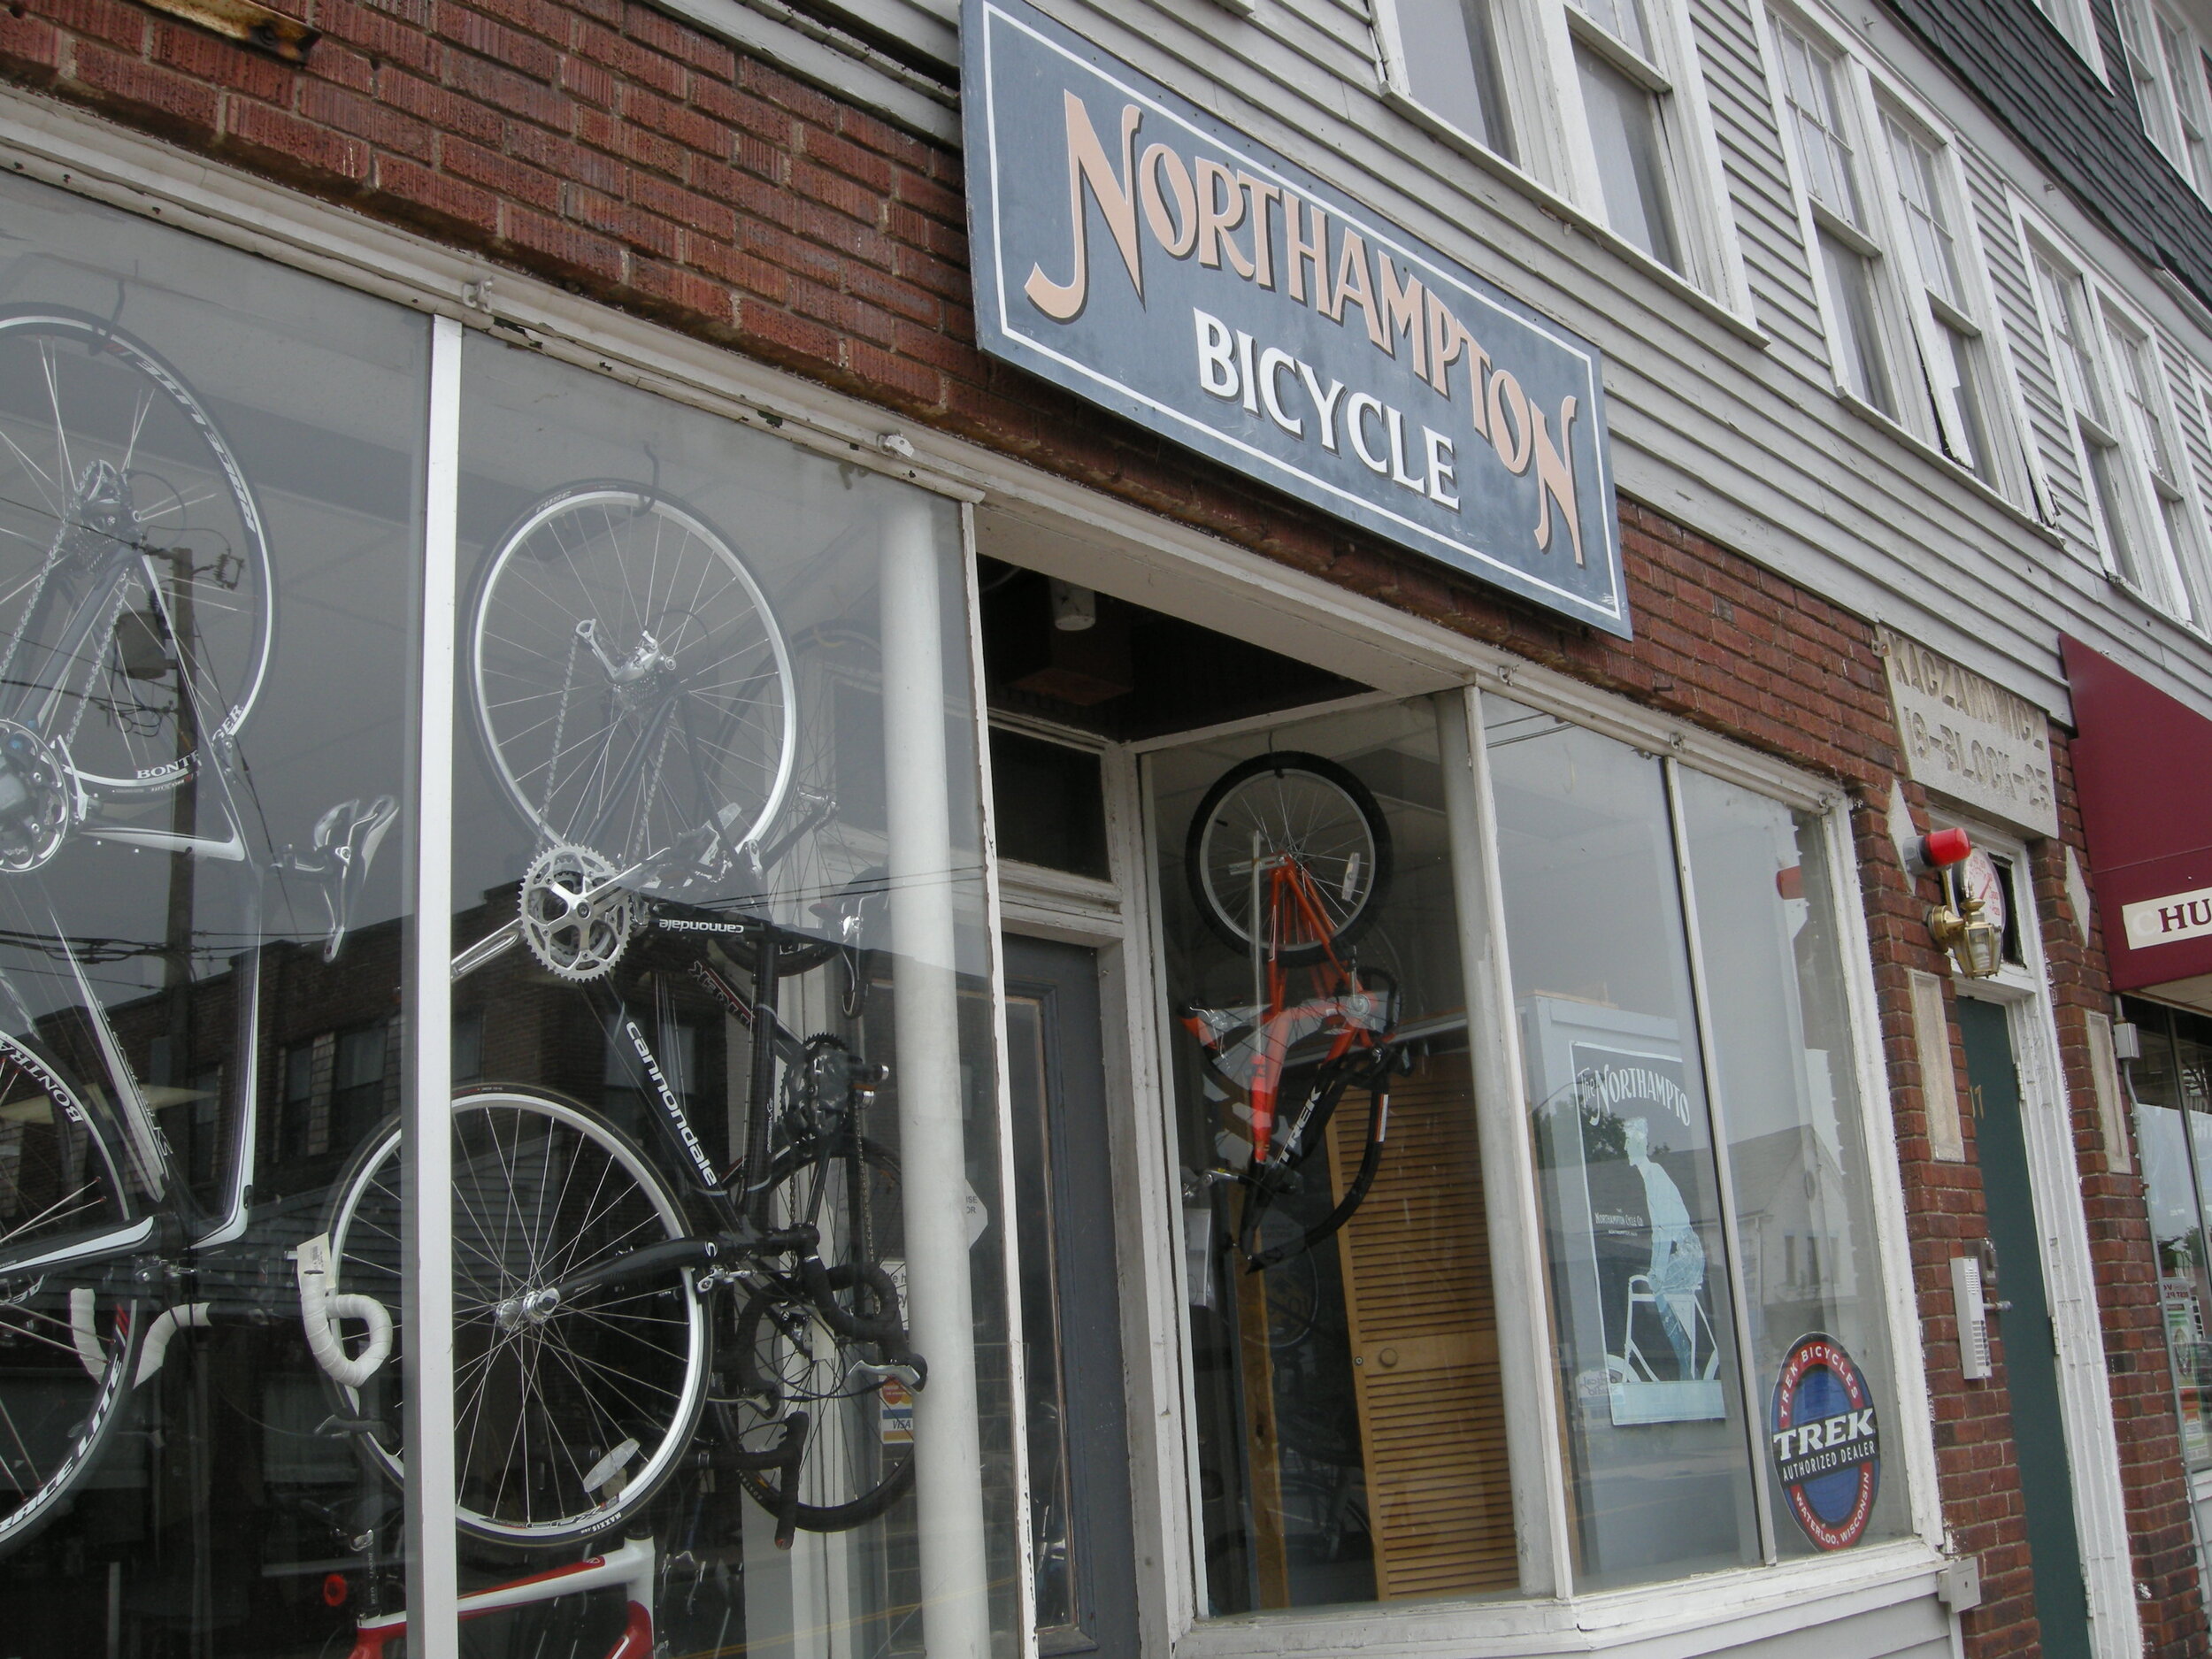 Elliot used this bike shop when he lived there.